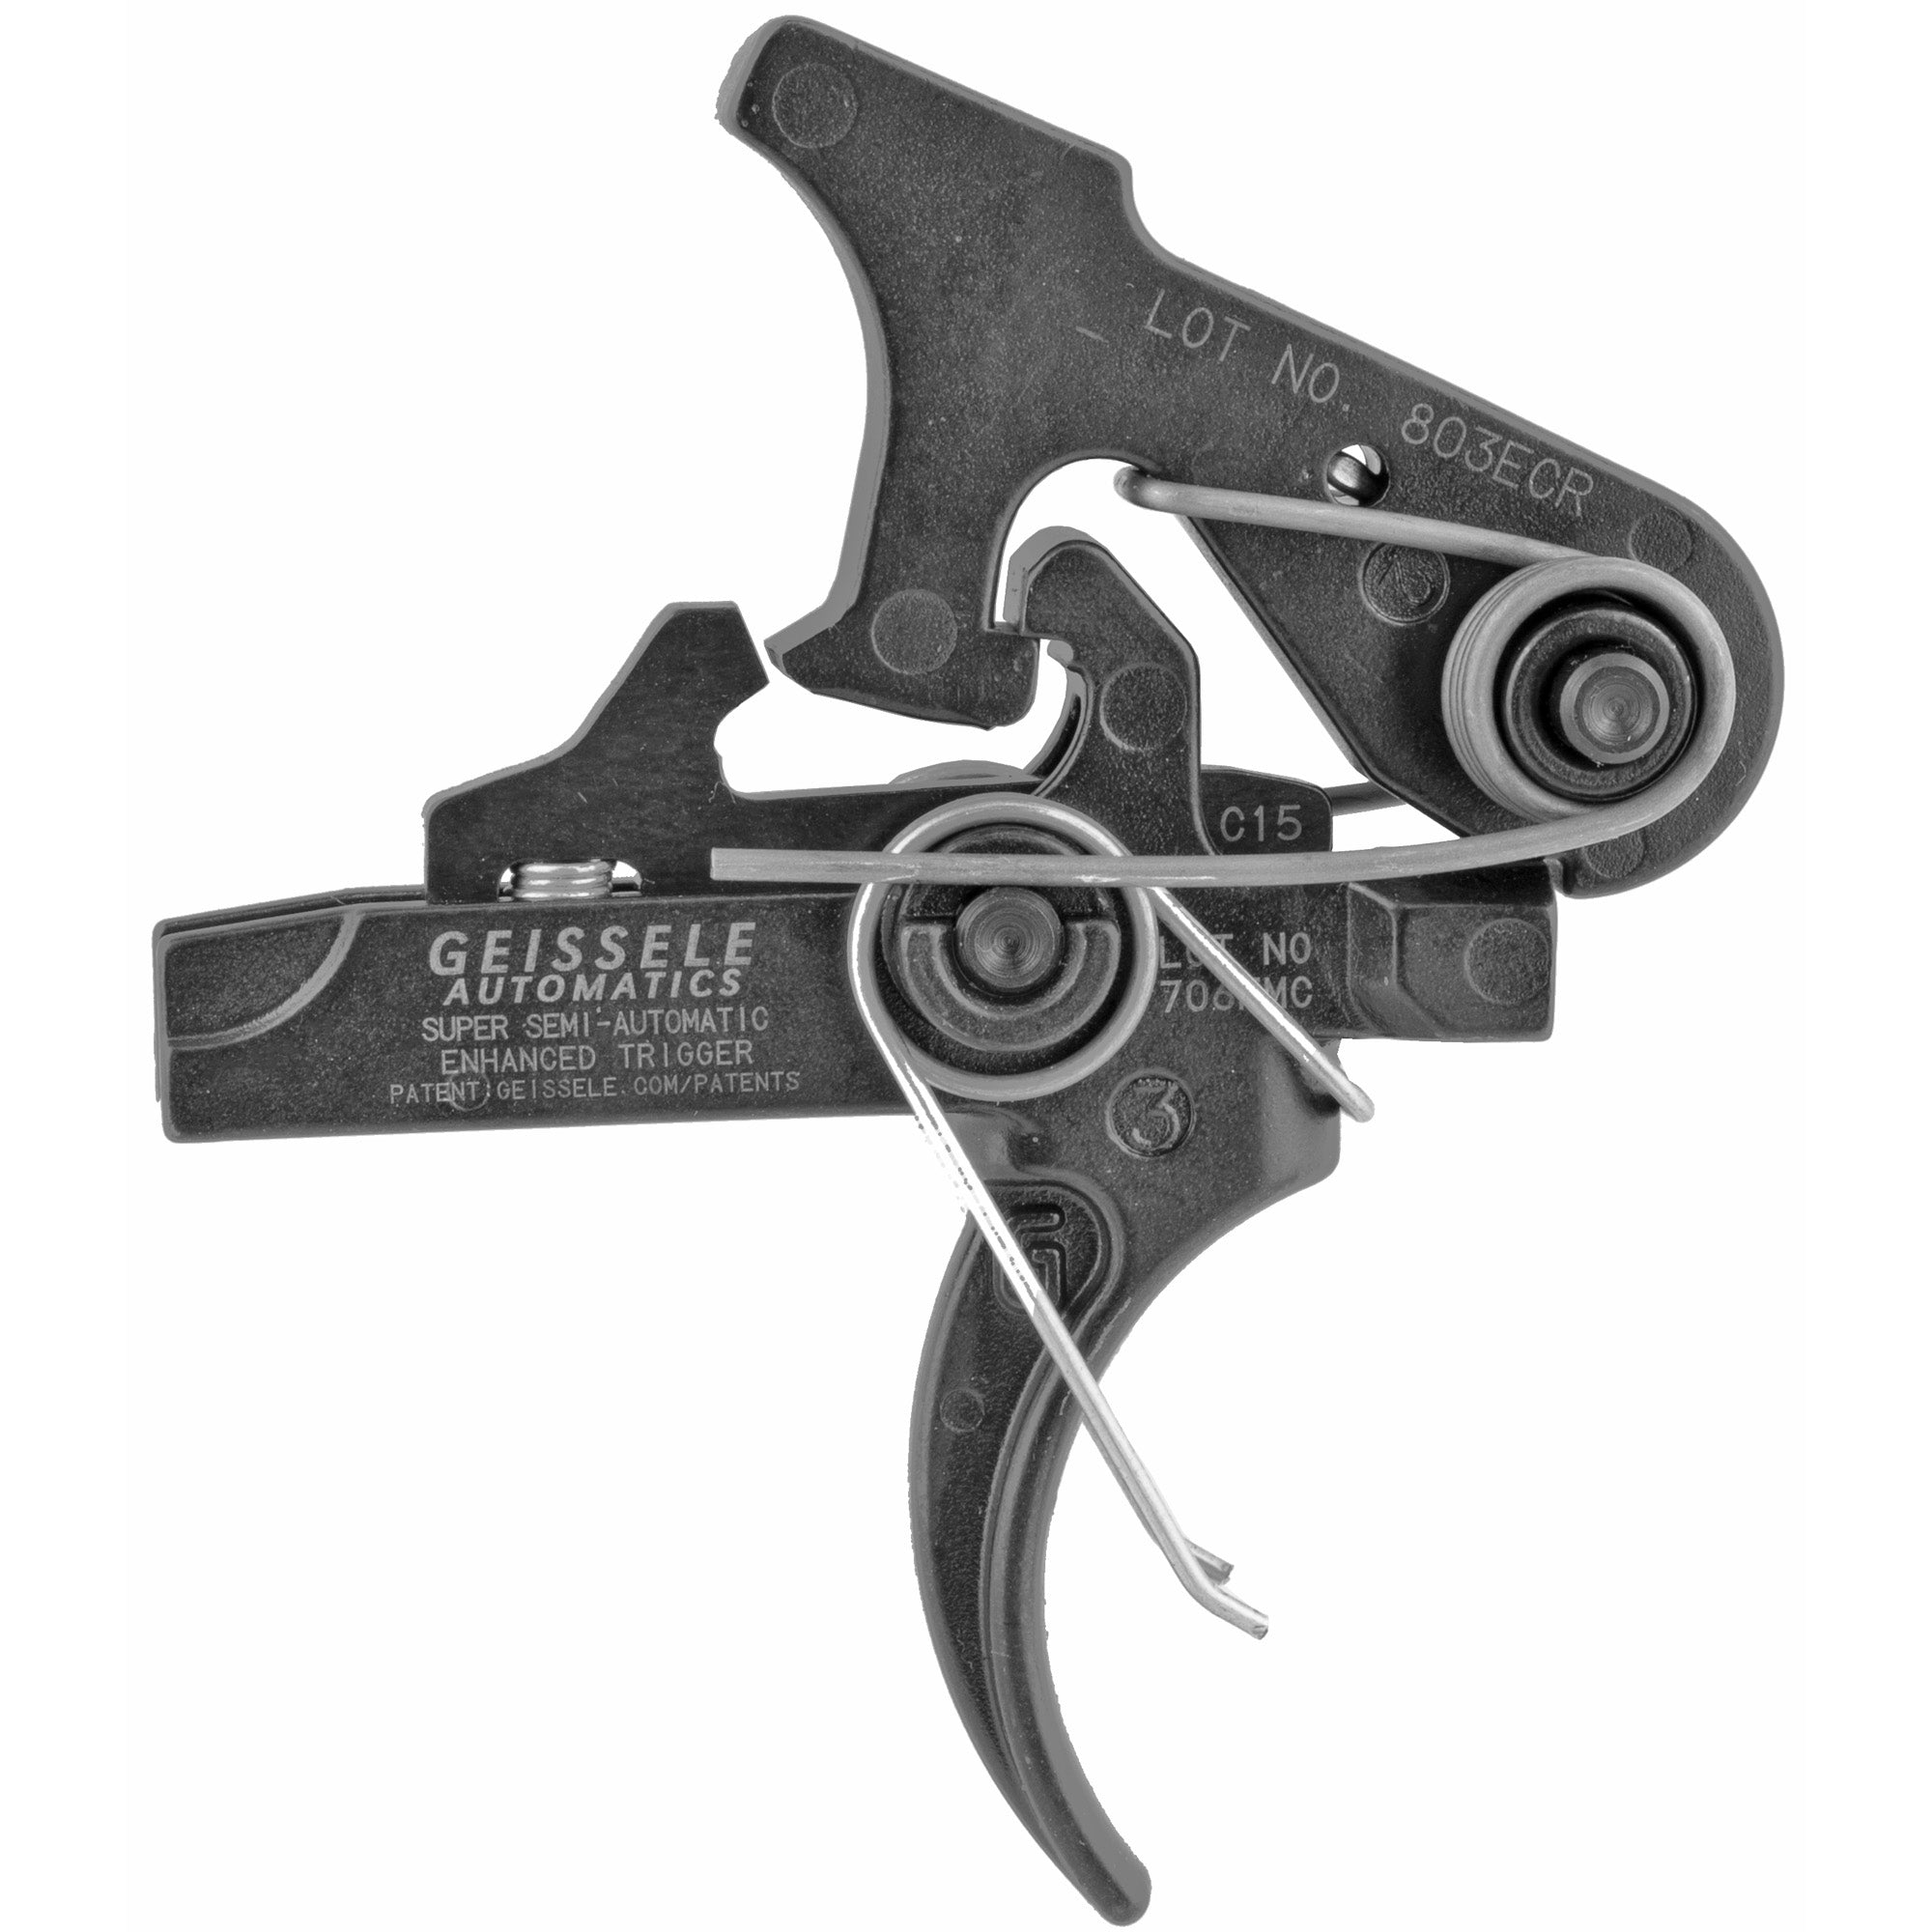 Geissele SSA-E Trigger, a Super Semi-Automatic Enhanced 2-Stage Trigger, showcasing its sleek design and precise craftsmanship for improved shooting accuracy and control.